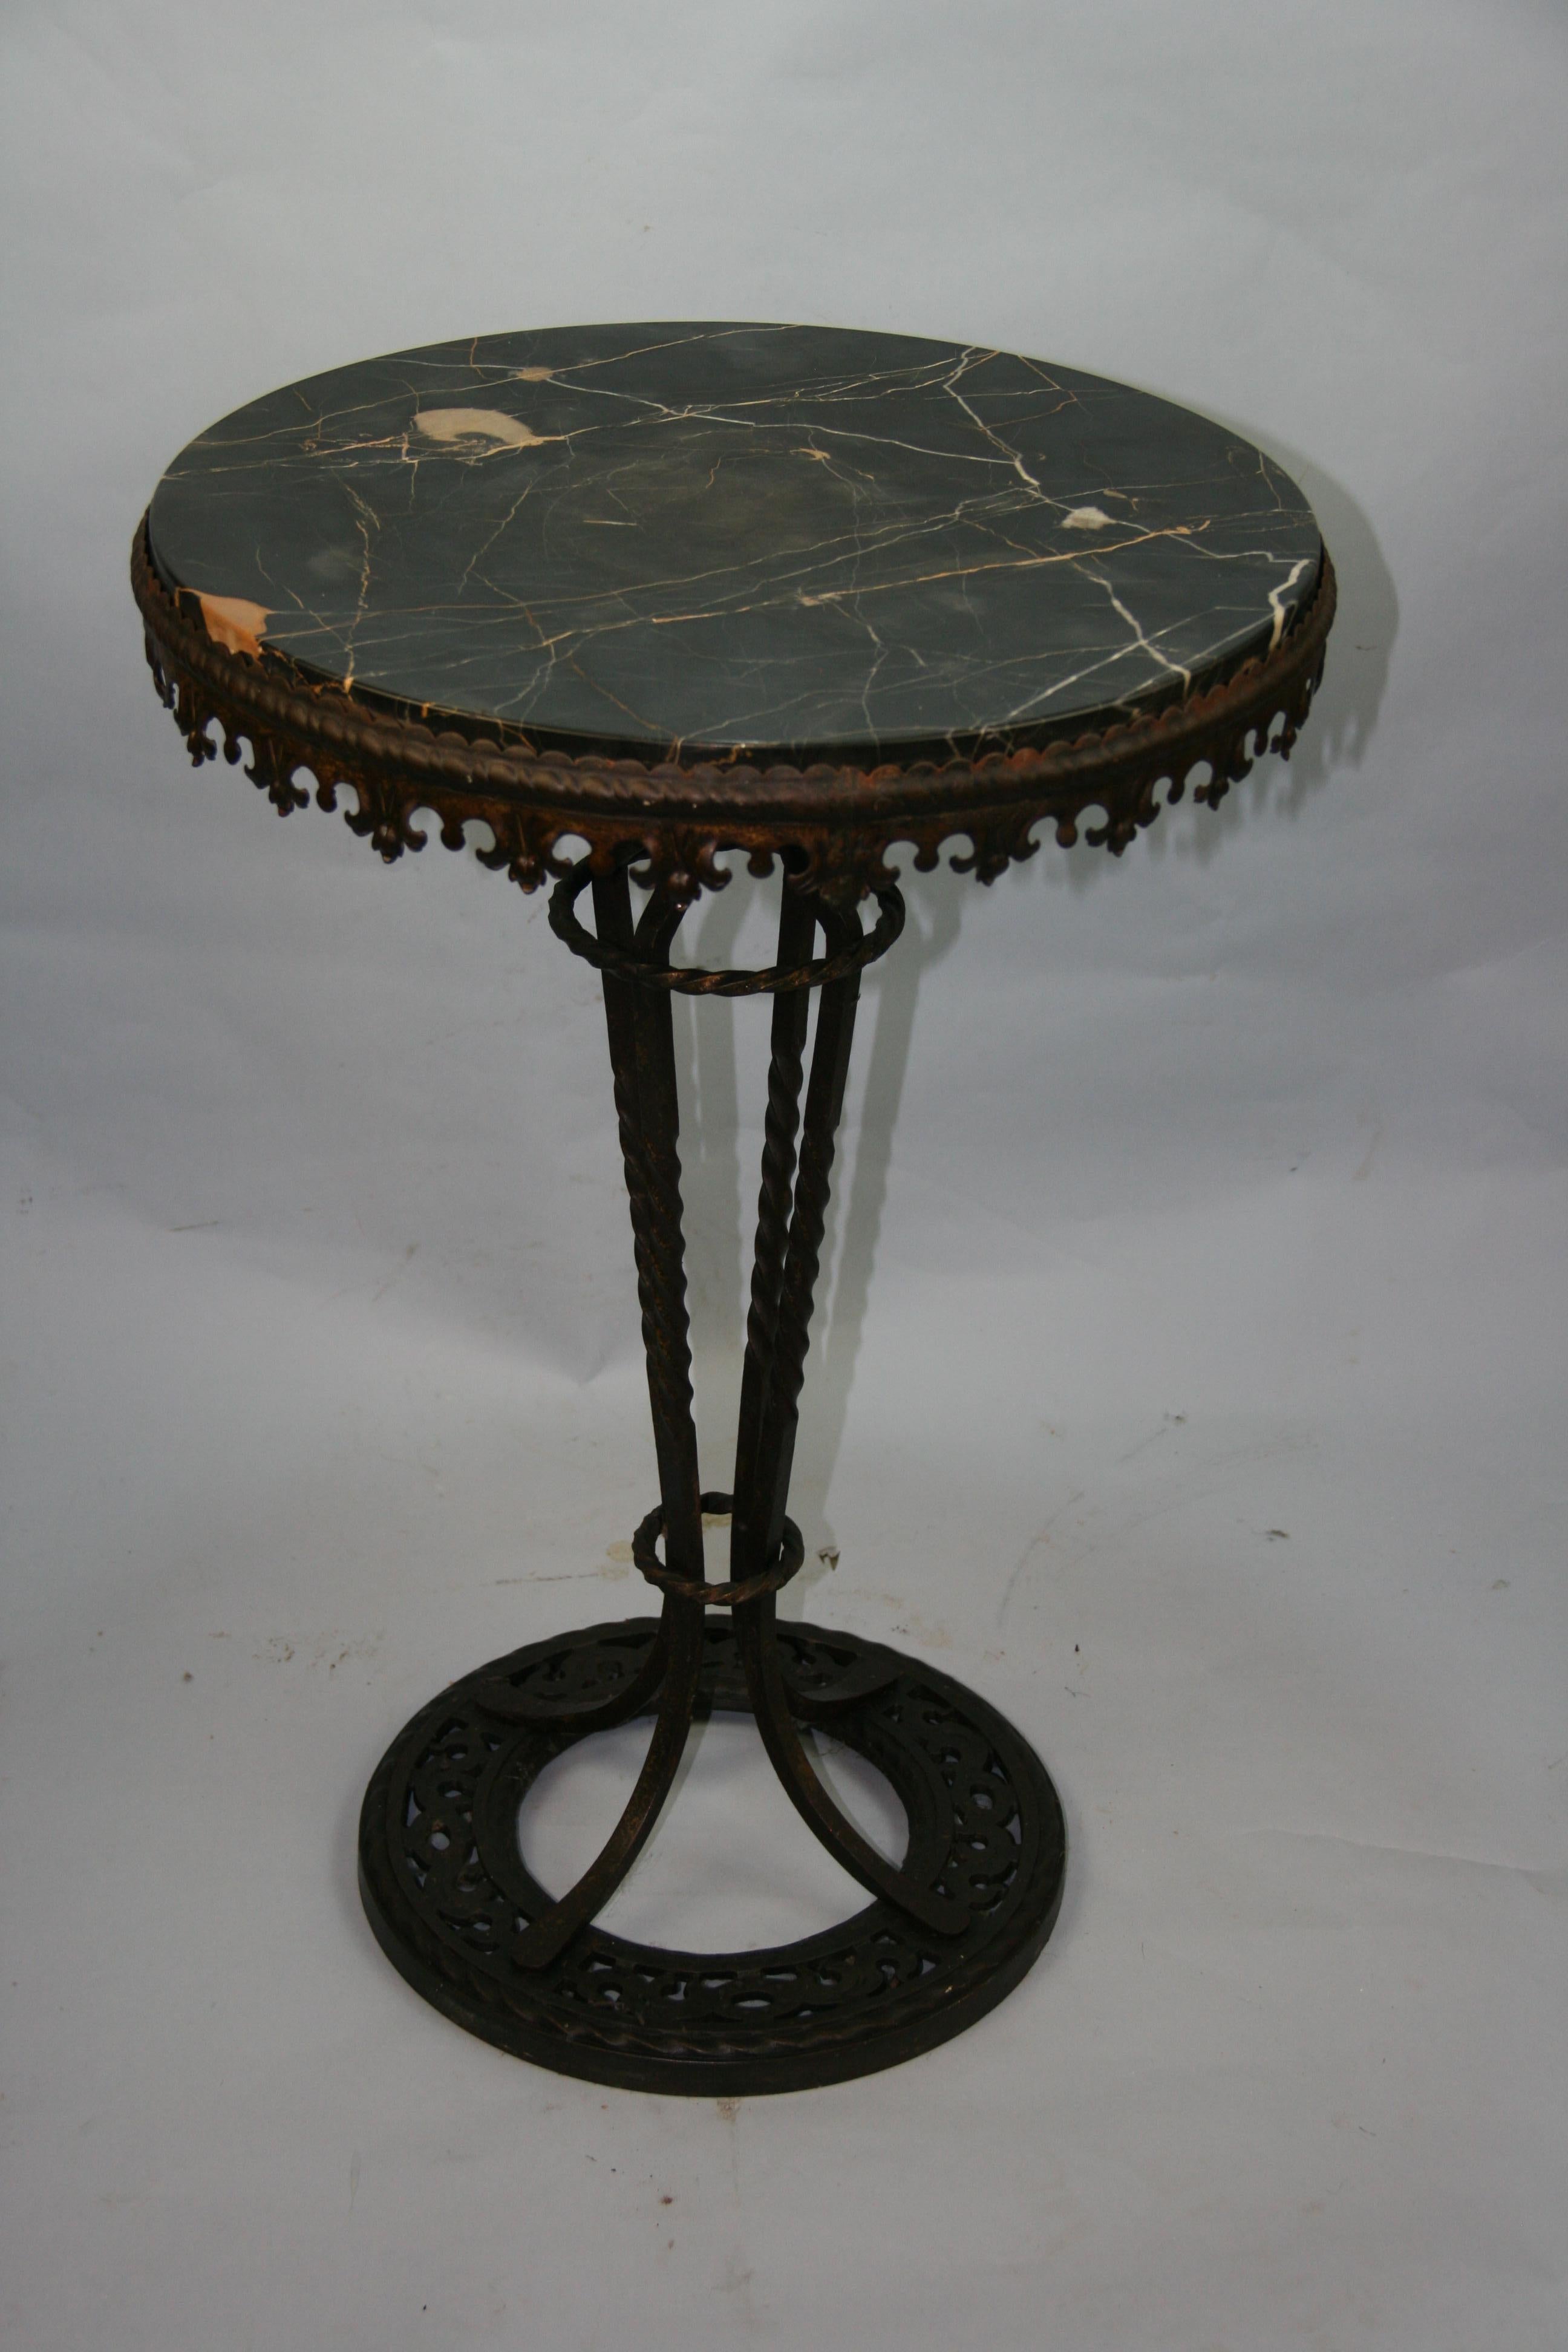 Victorian iron and marble pedestal/side table
Measures: Base diameter 11